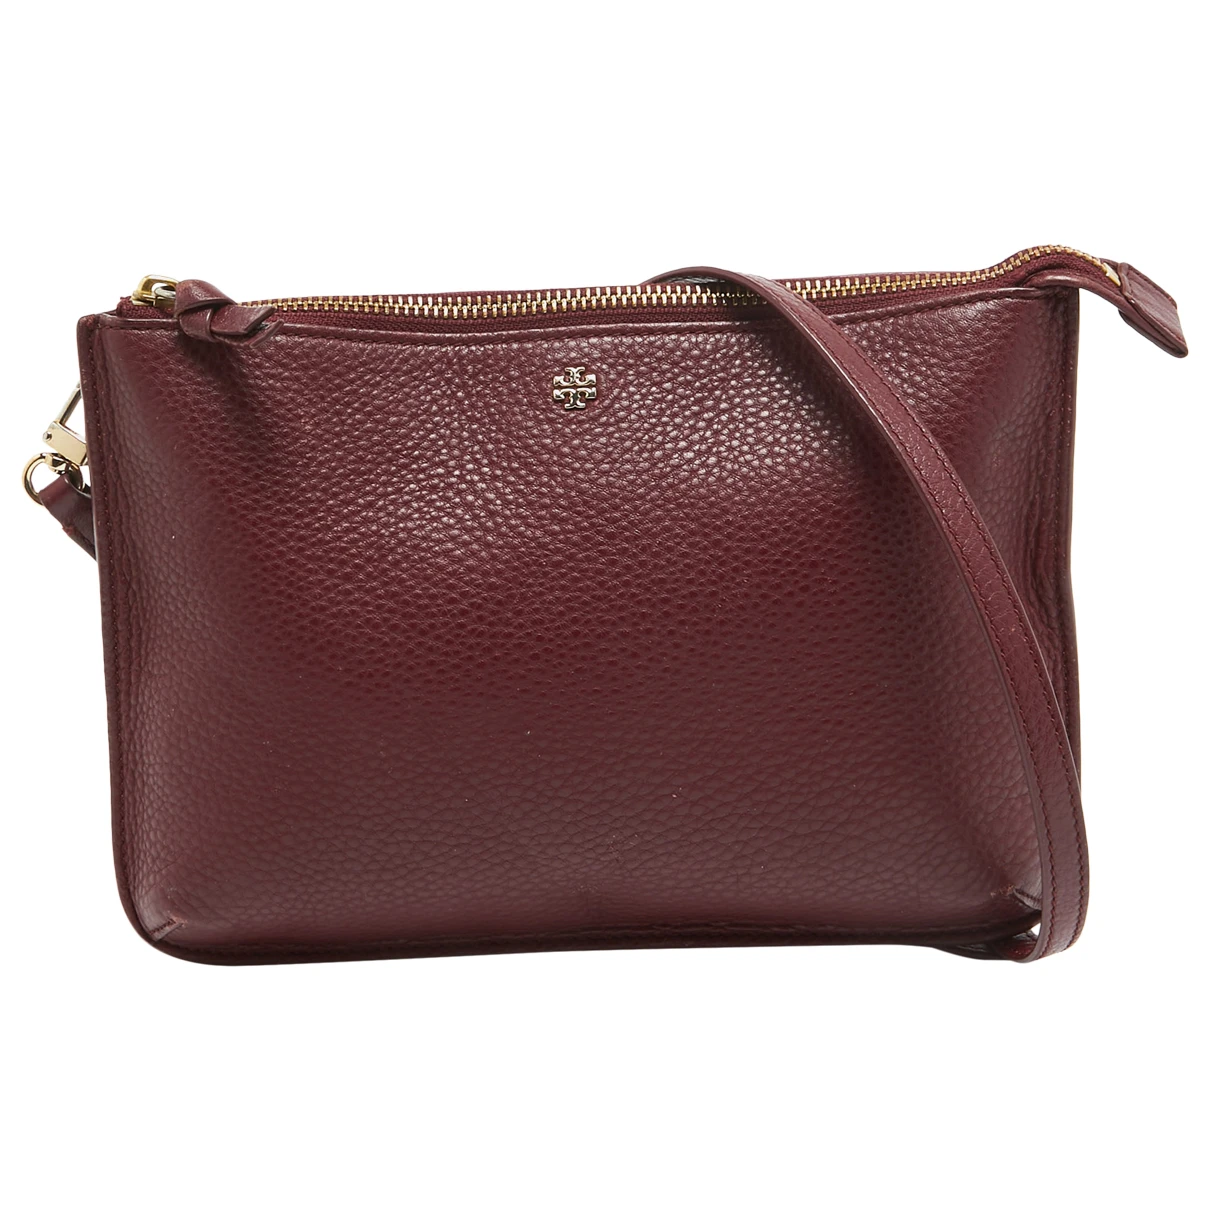 Pre-owned Tory Burch Leather Handbag In Burgundy